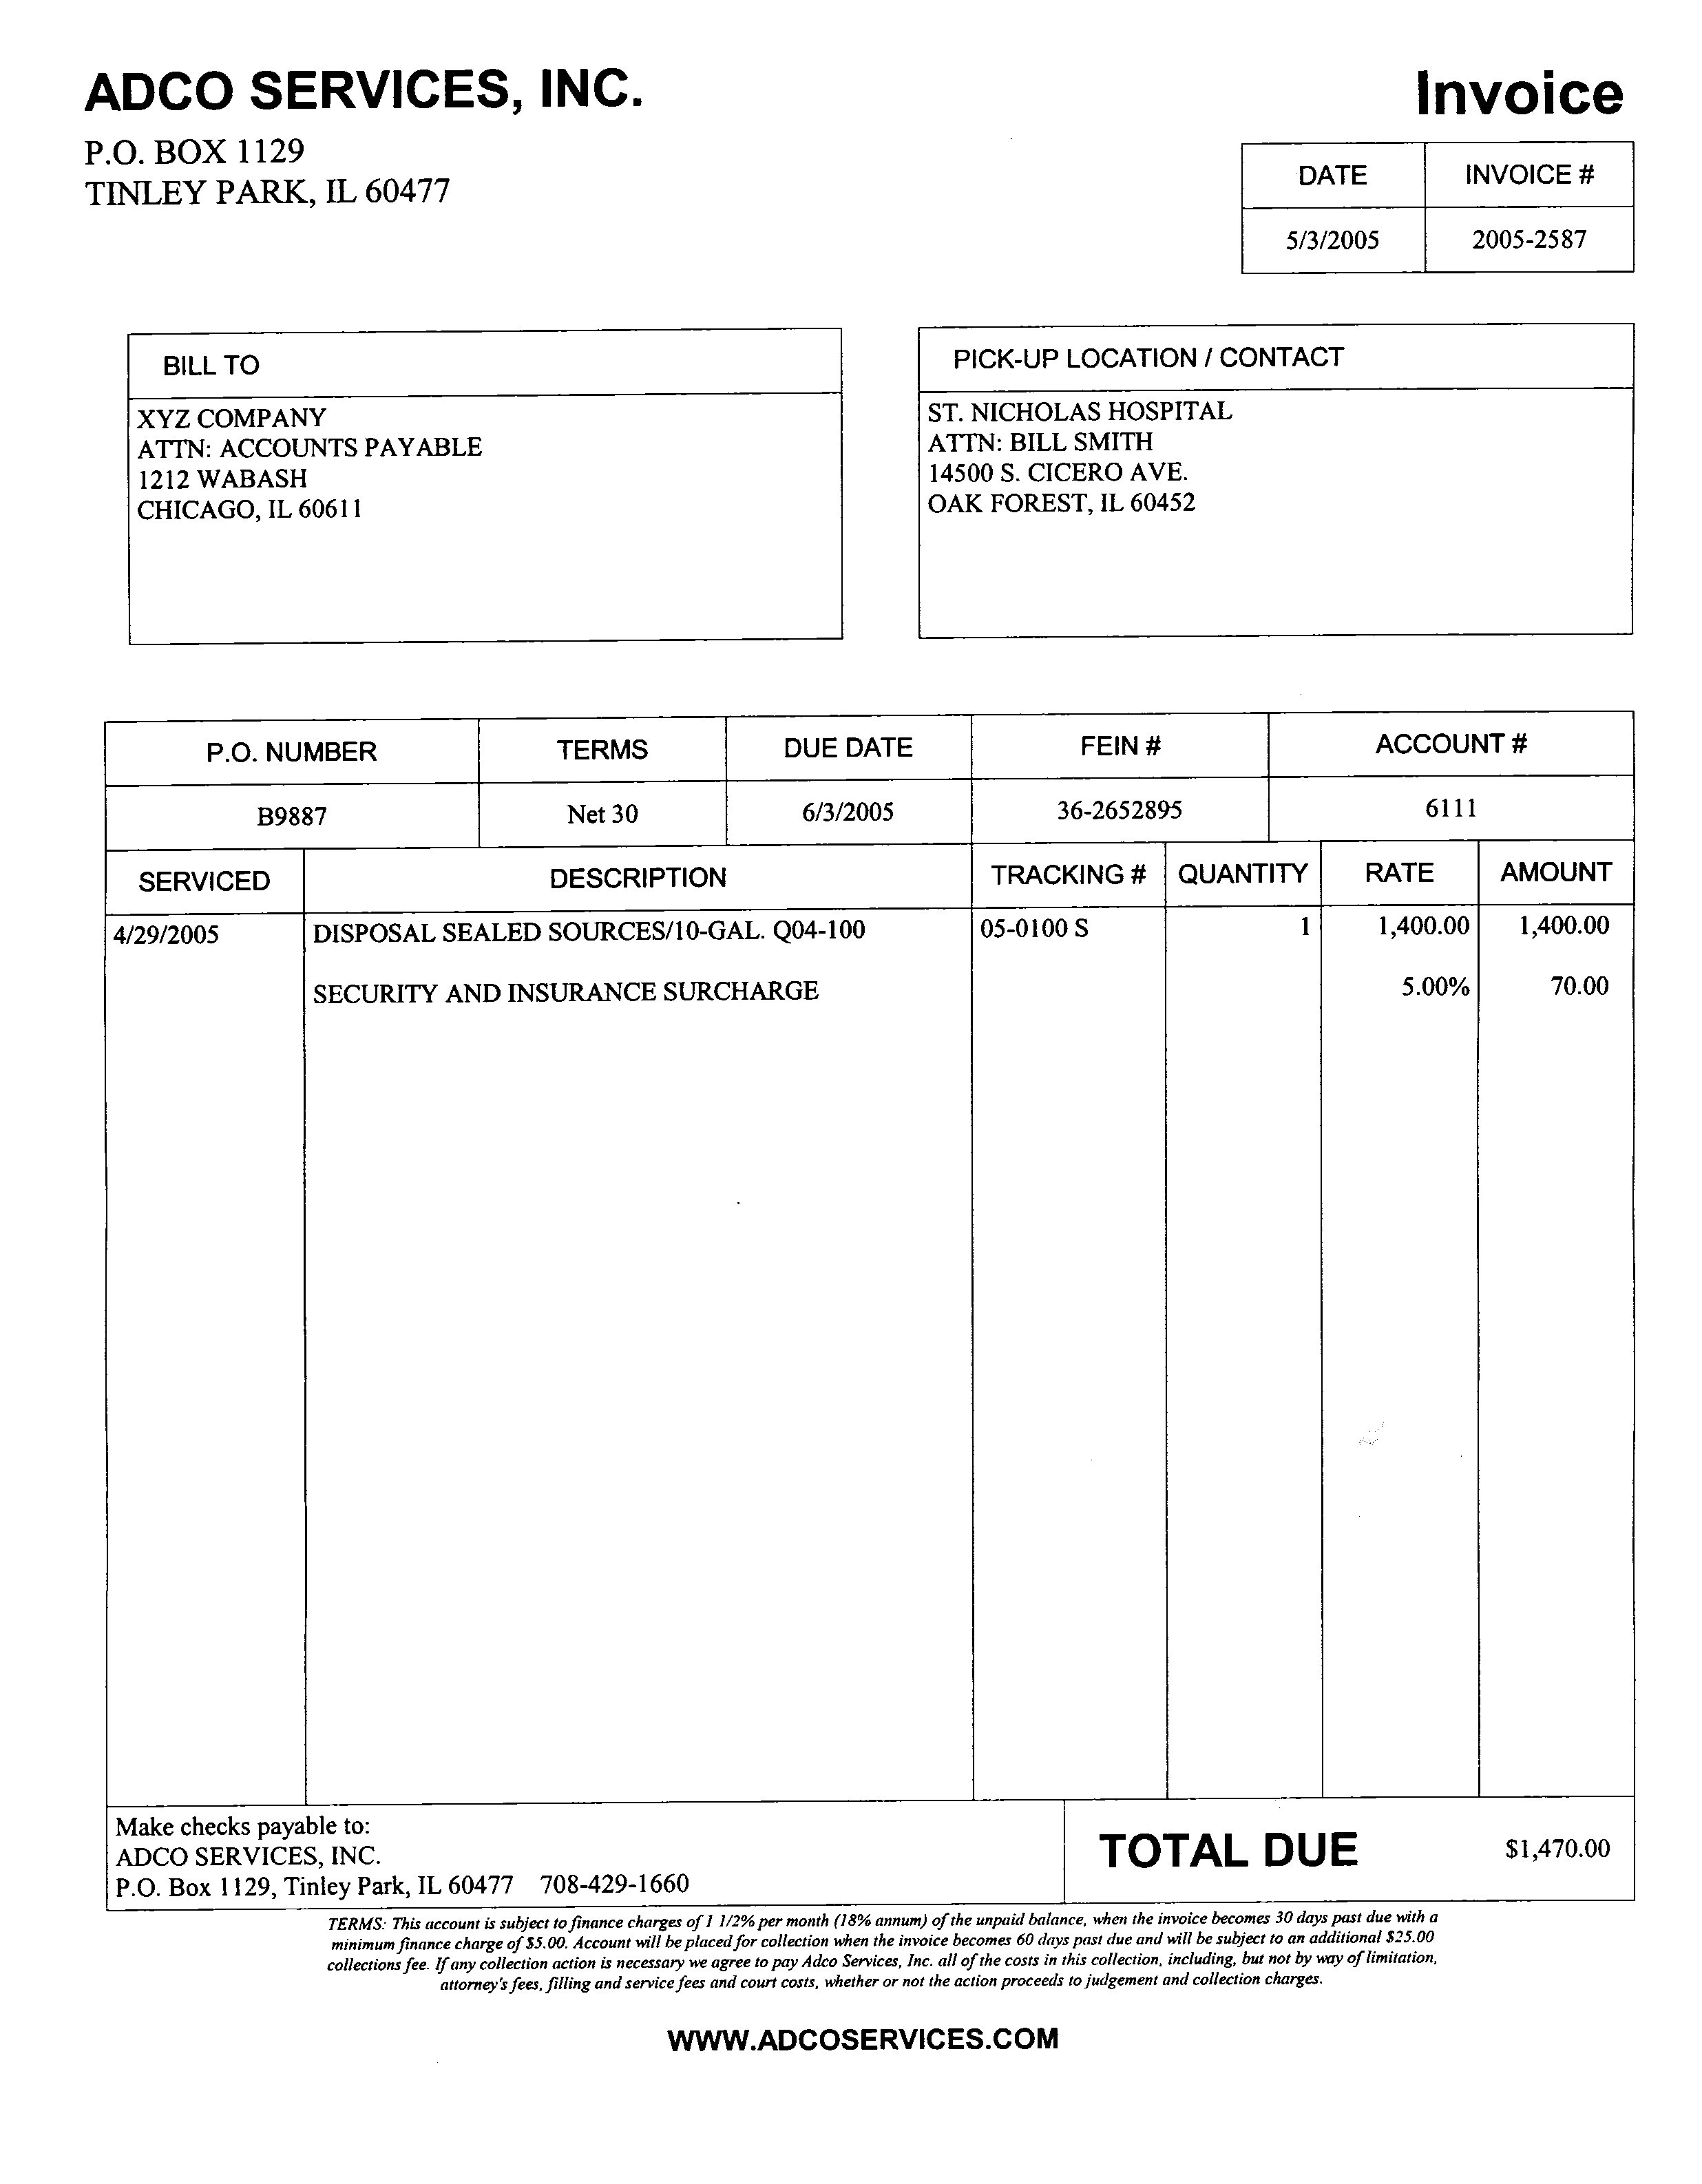 invcswanndvrnet picturesque invoice bill to with licious vat only invoice